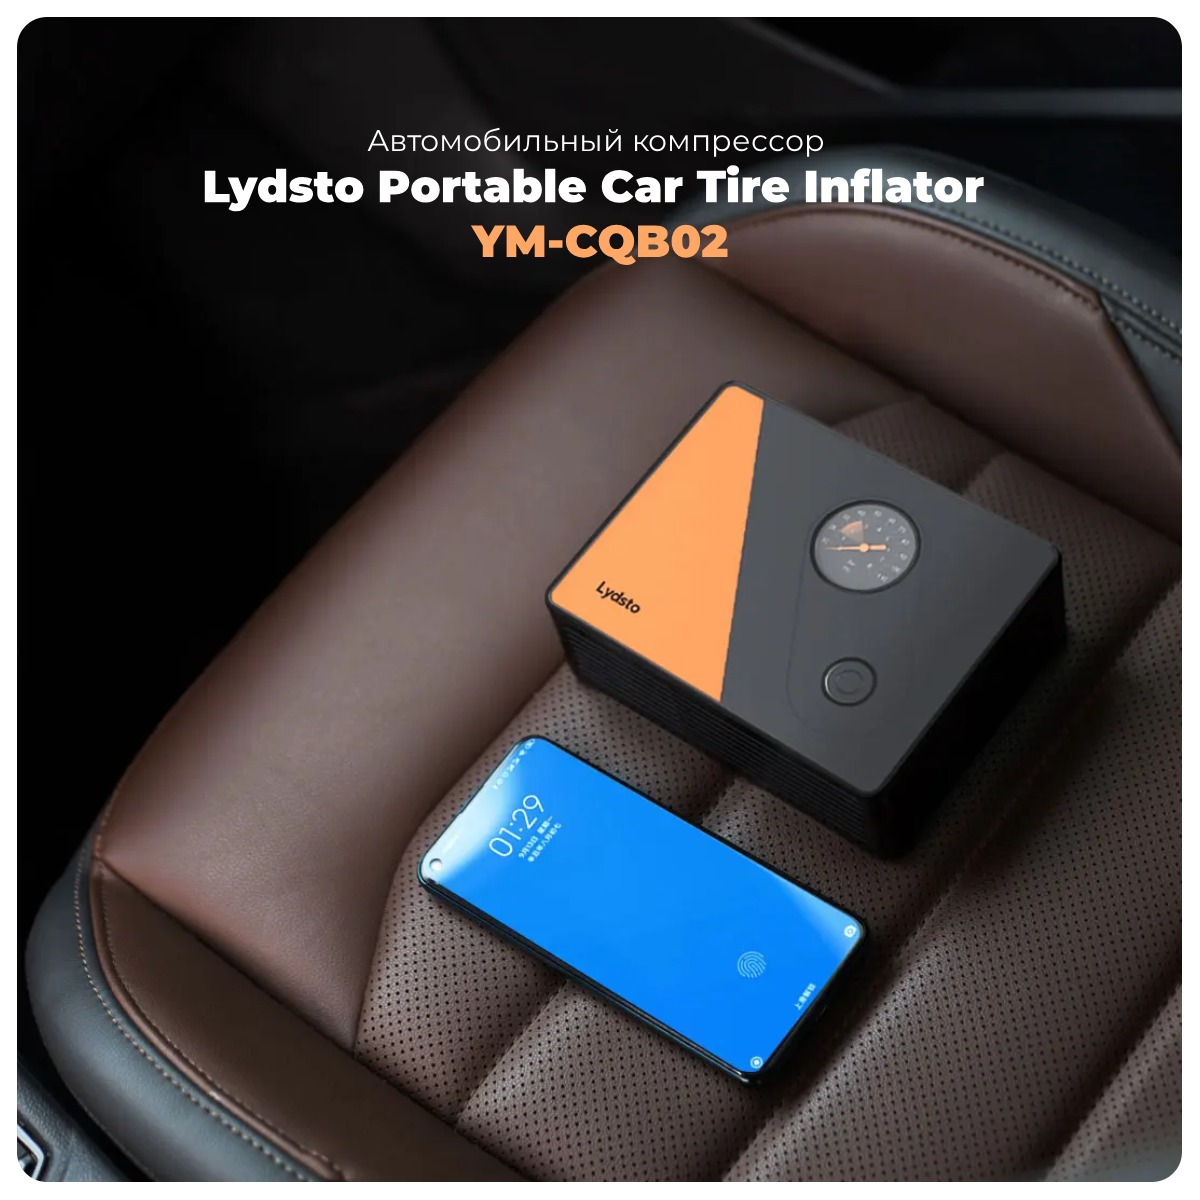 Lydsto-Portable-Car-Tire-Inflator-YM-CQB02-01